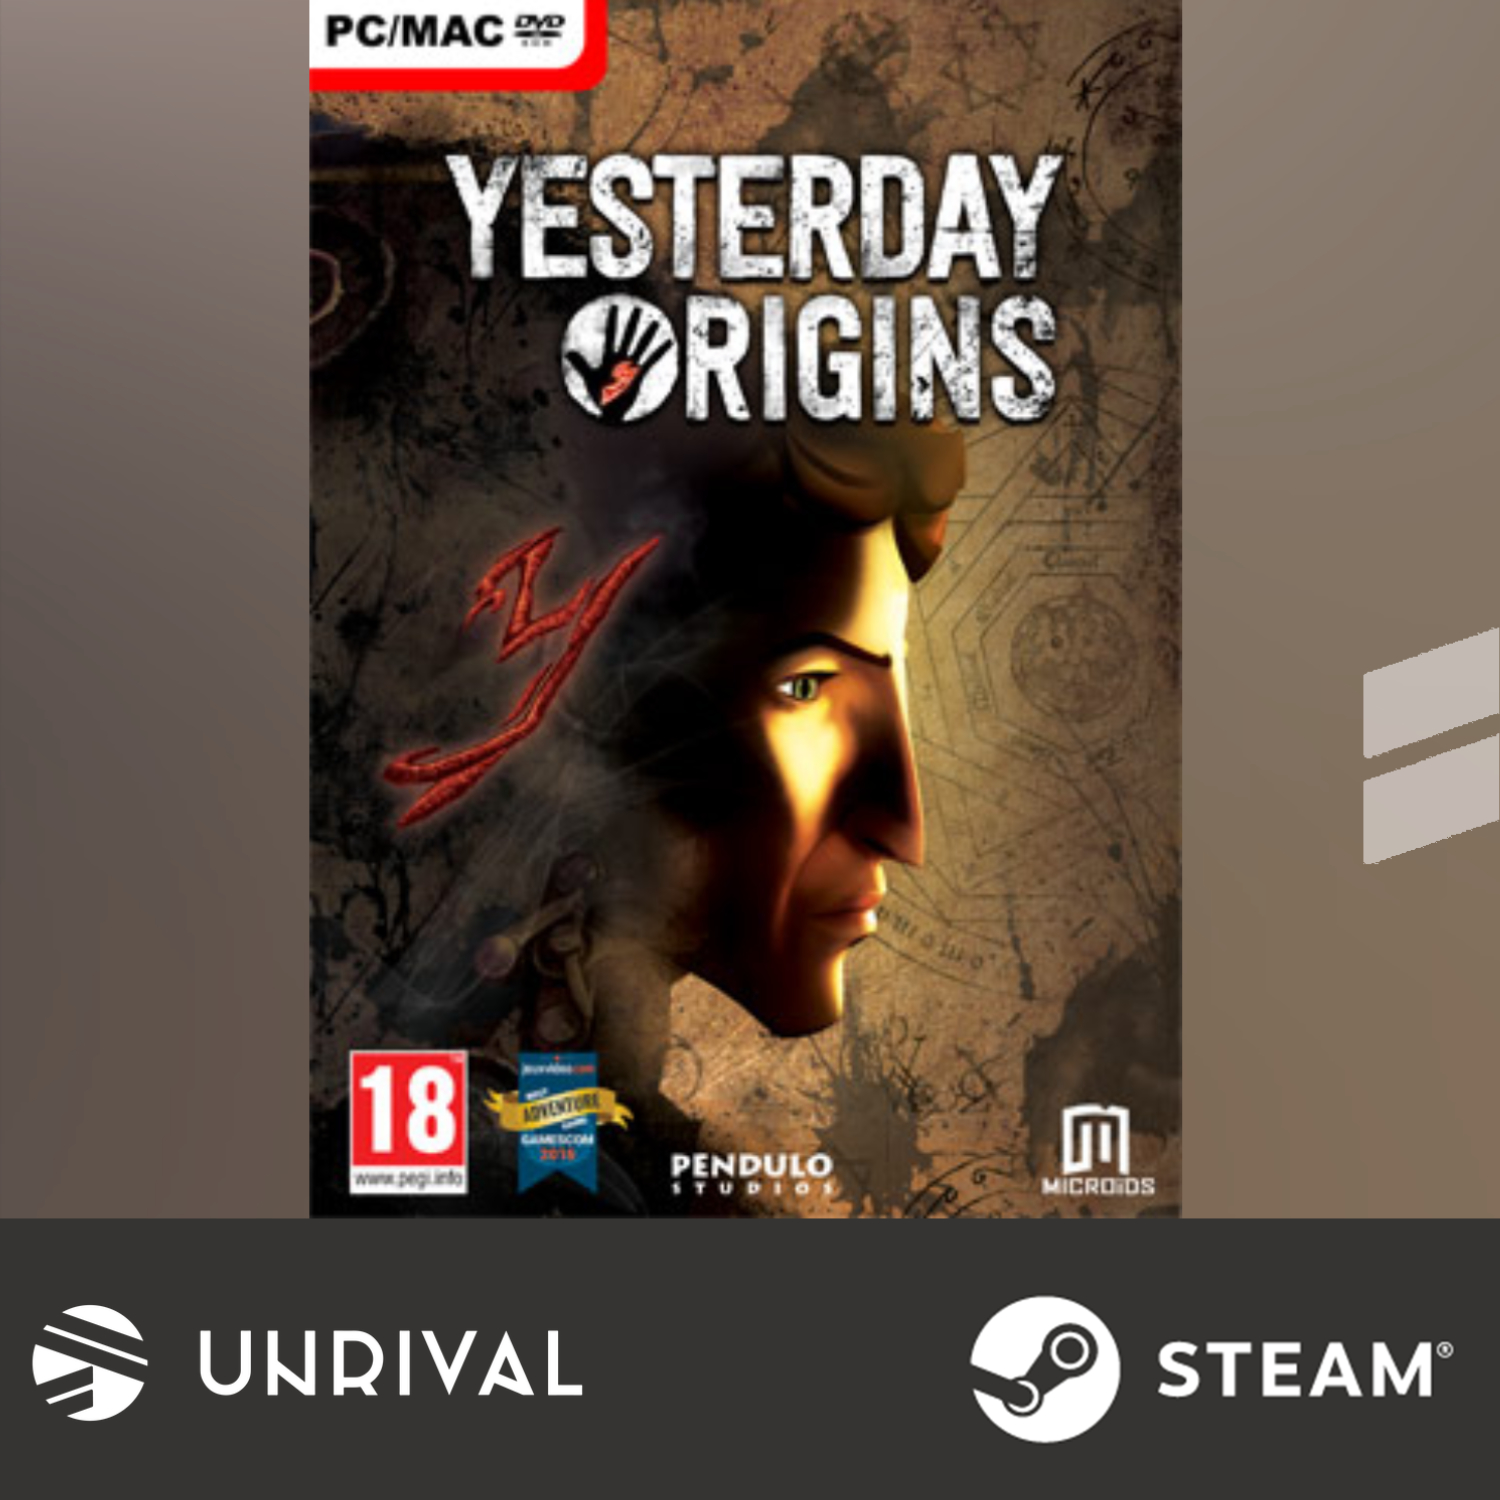 [Hot Sale] Yesterday Origins PC Digital Download Game (Single Player) - Unrival